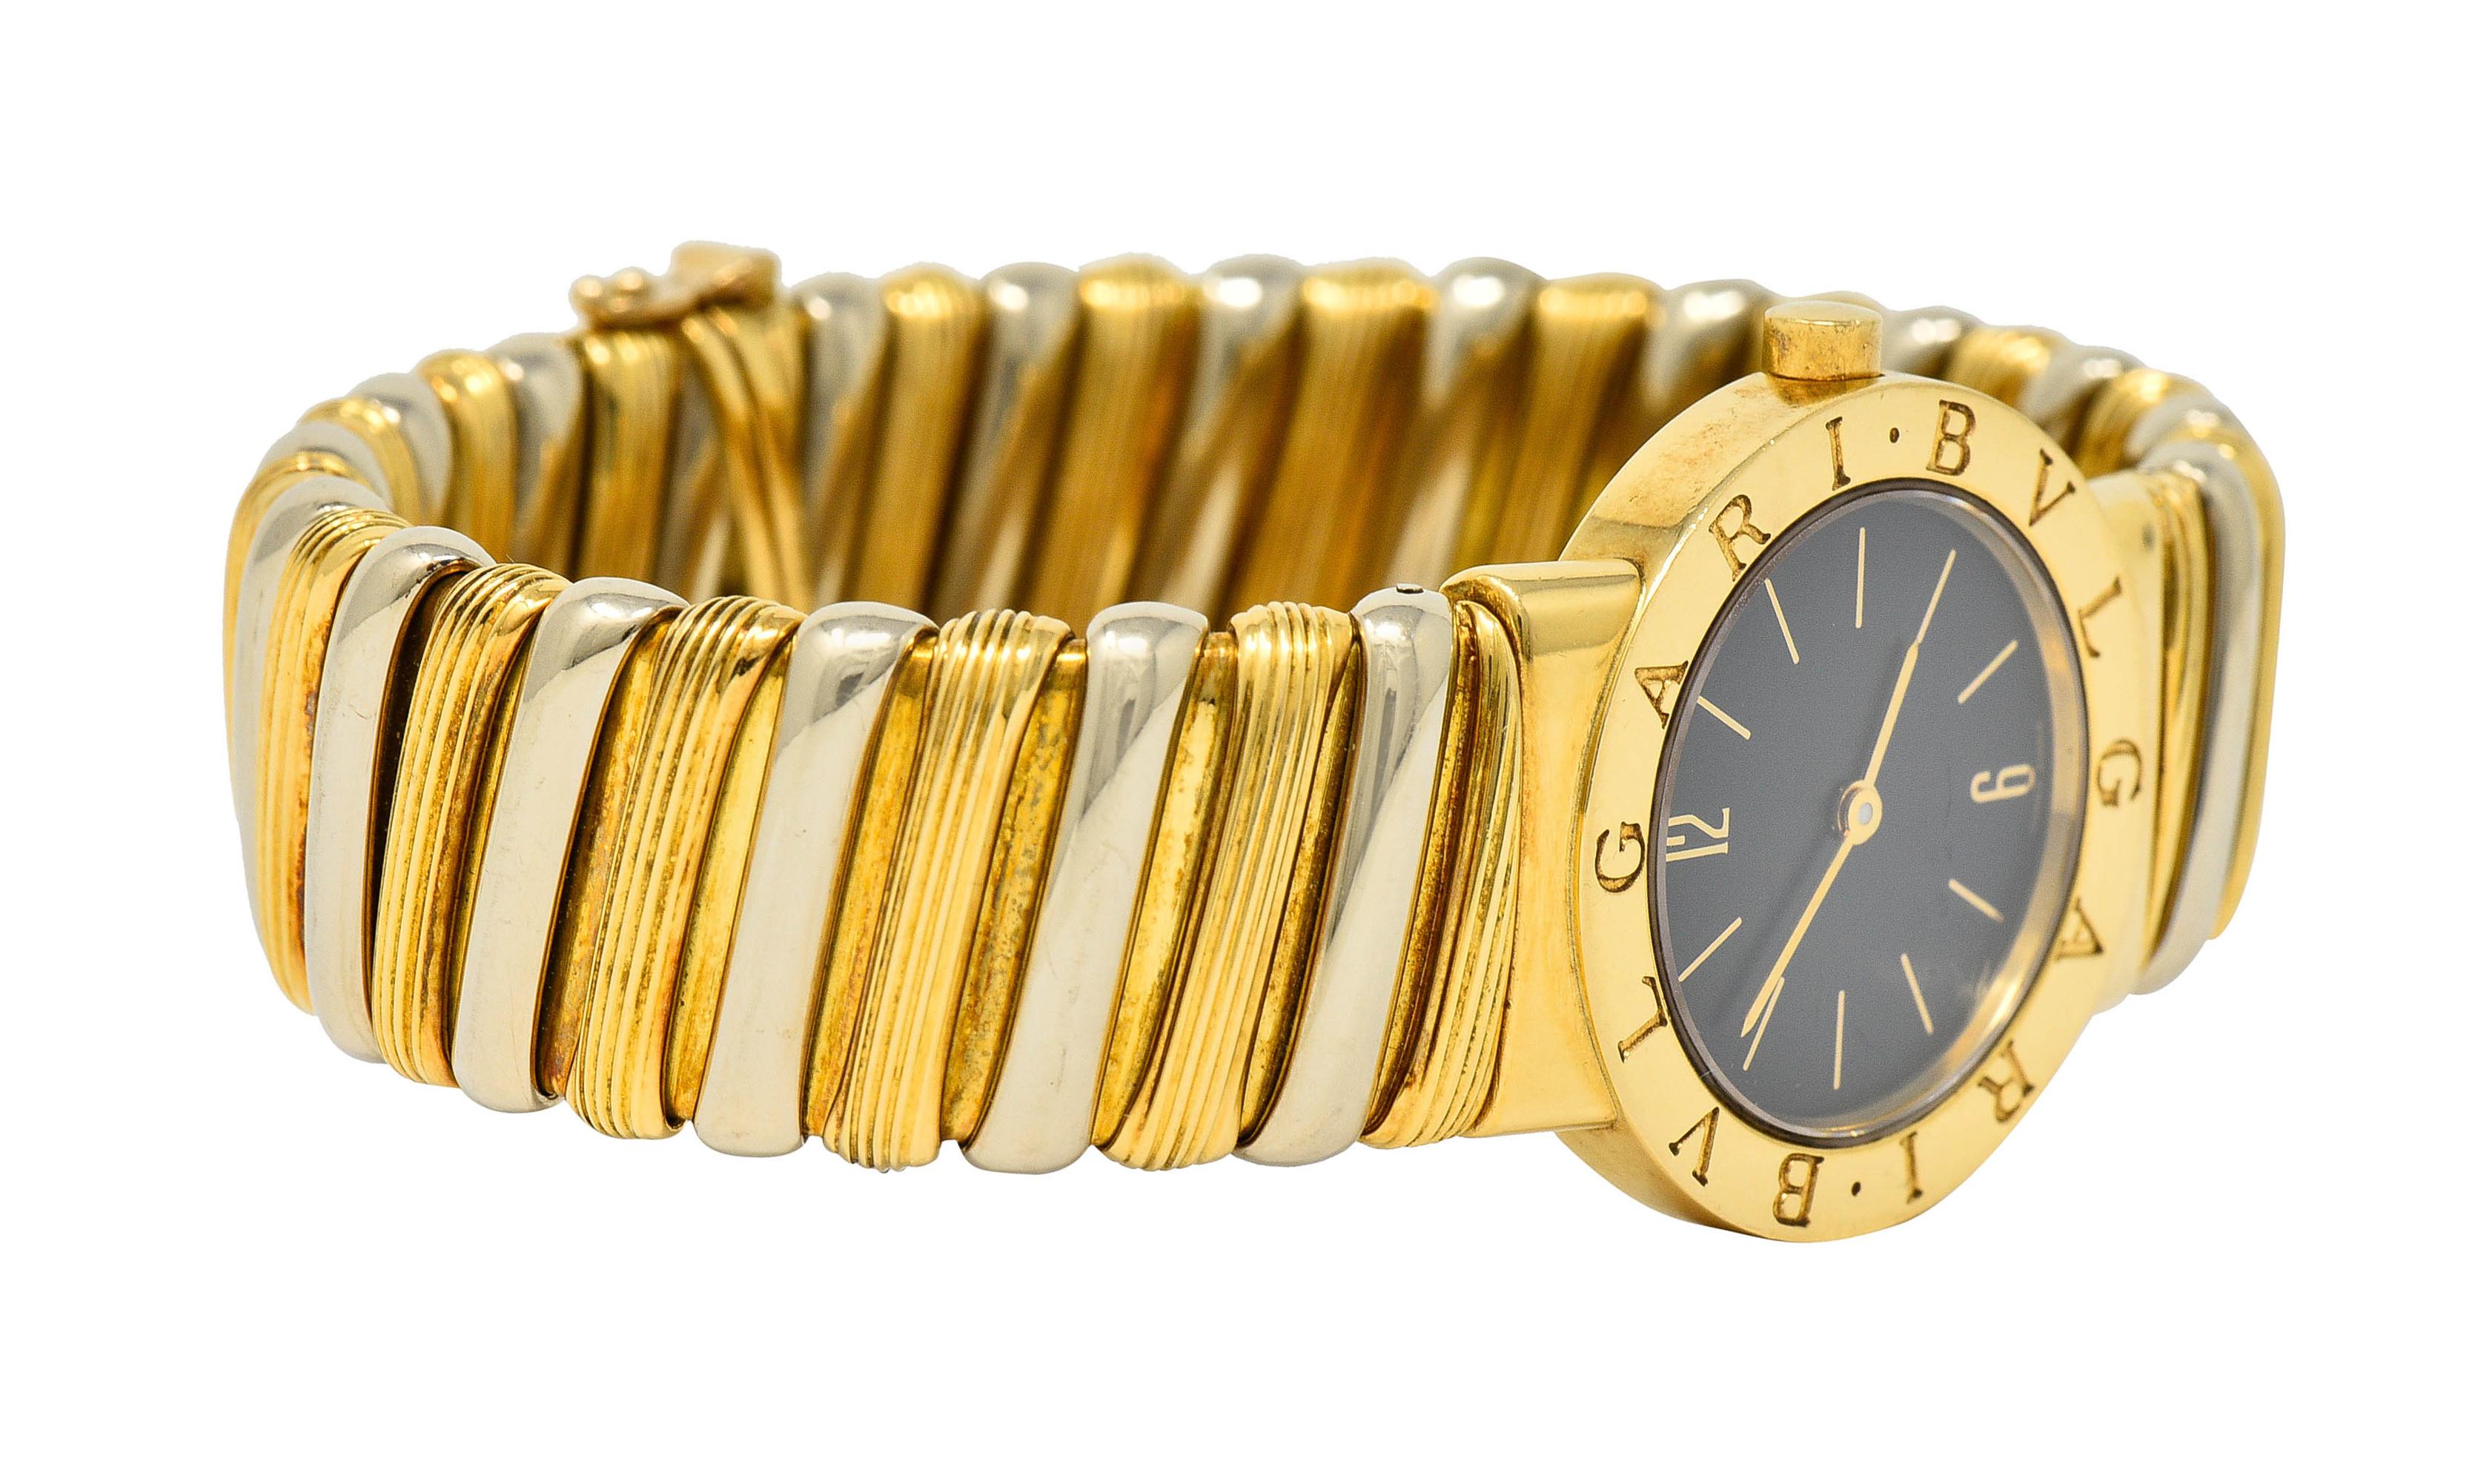 Springy cuff bracelet is comprised of polished white gold links alternating with ribbed gold links

Centering a sapphire crystal cover over a black watch face accented by gold hands and numerical markers

With a polished gold surround deeply